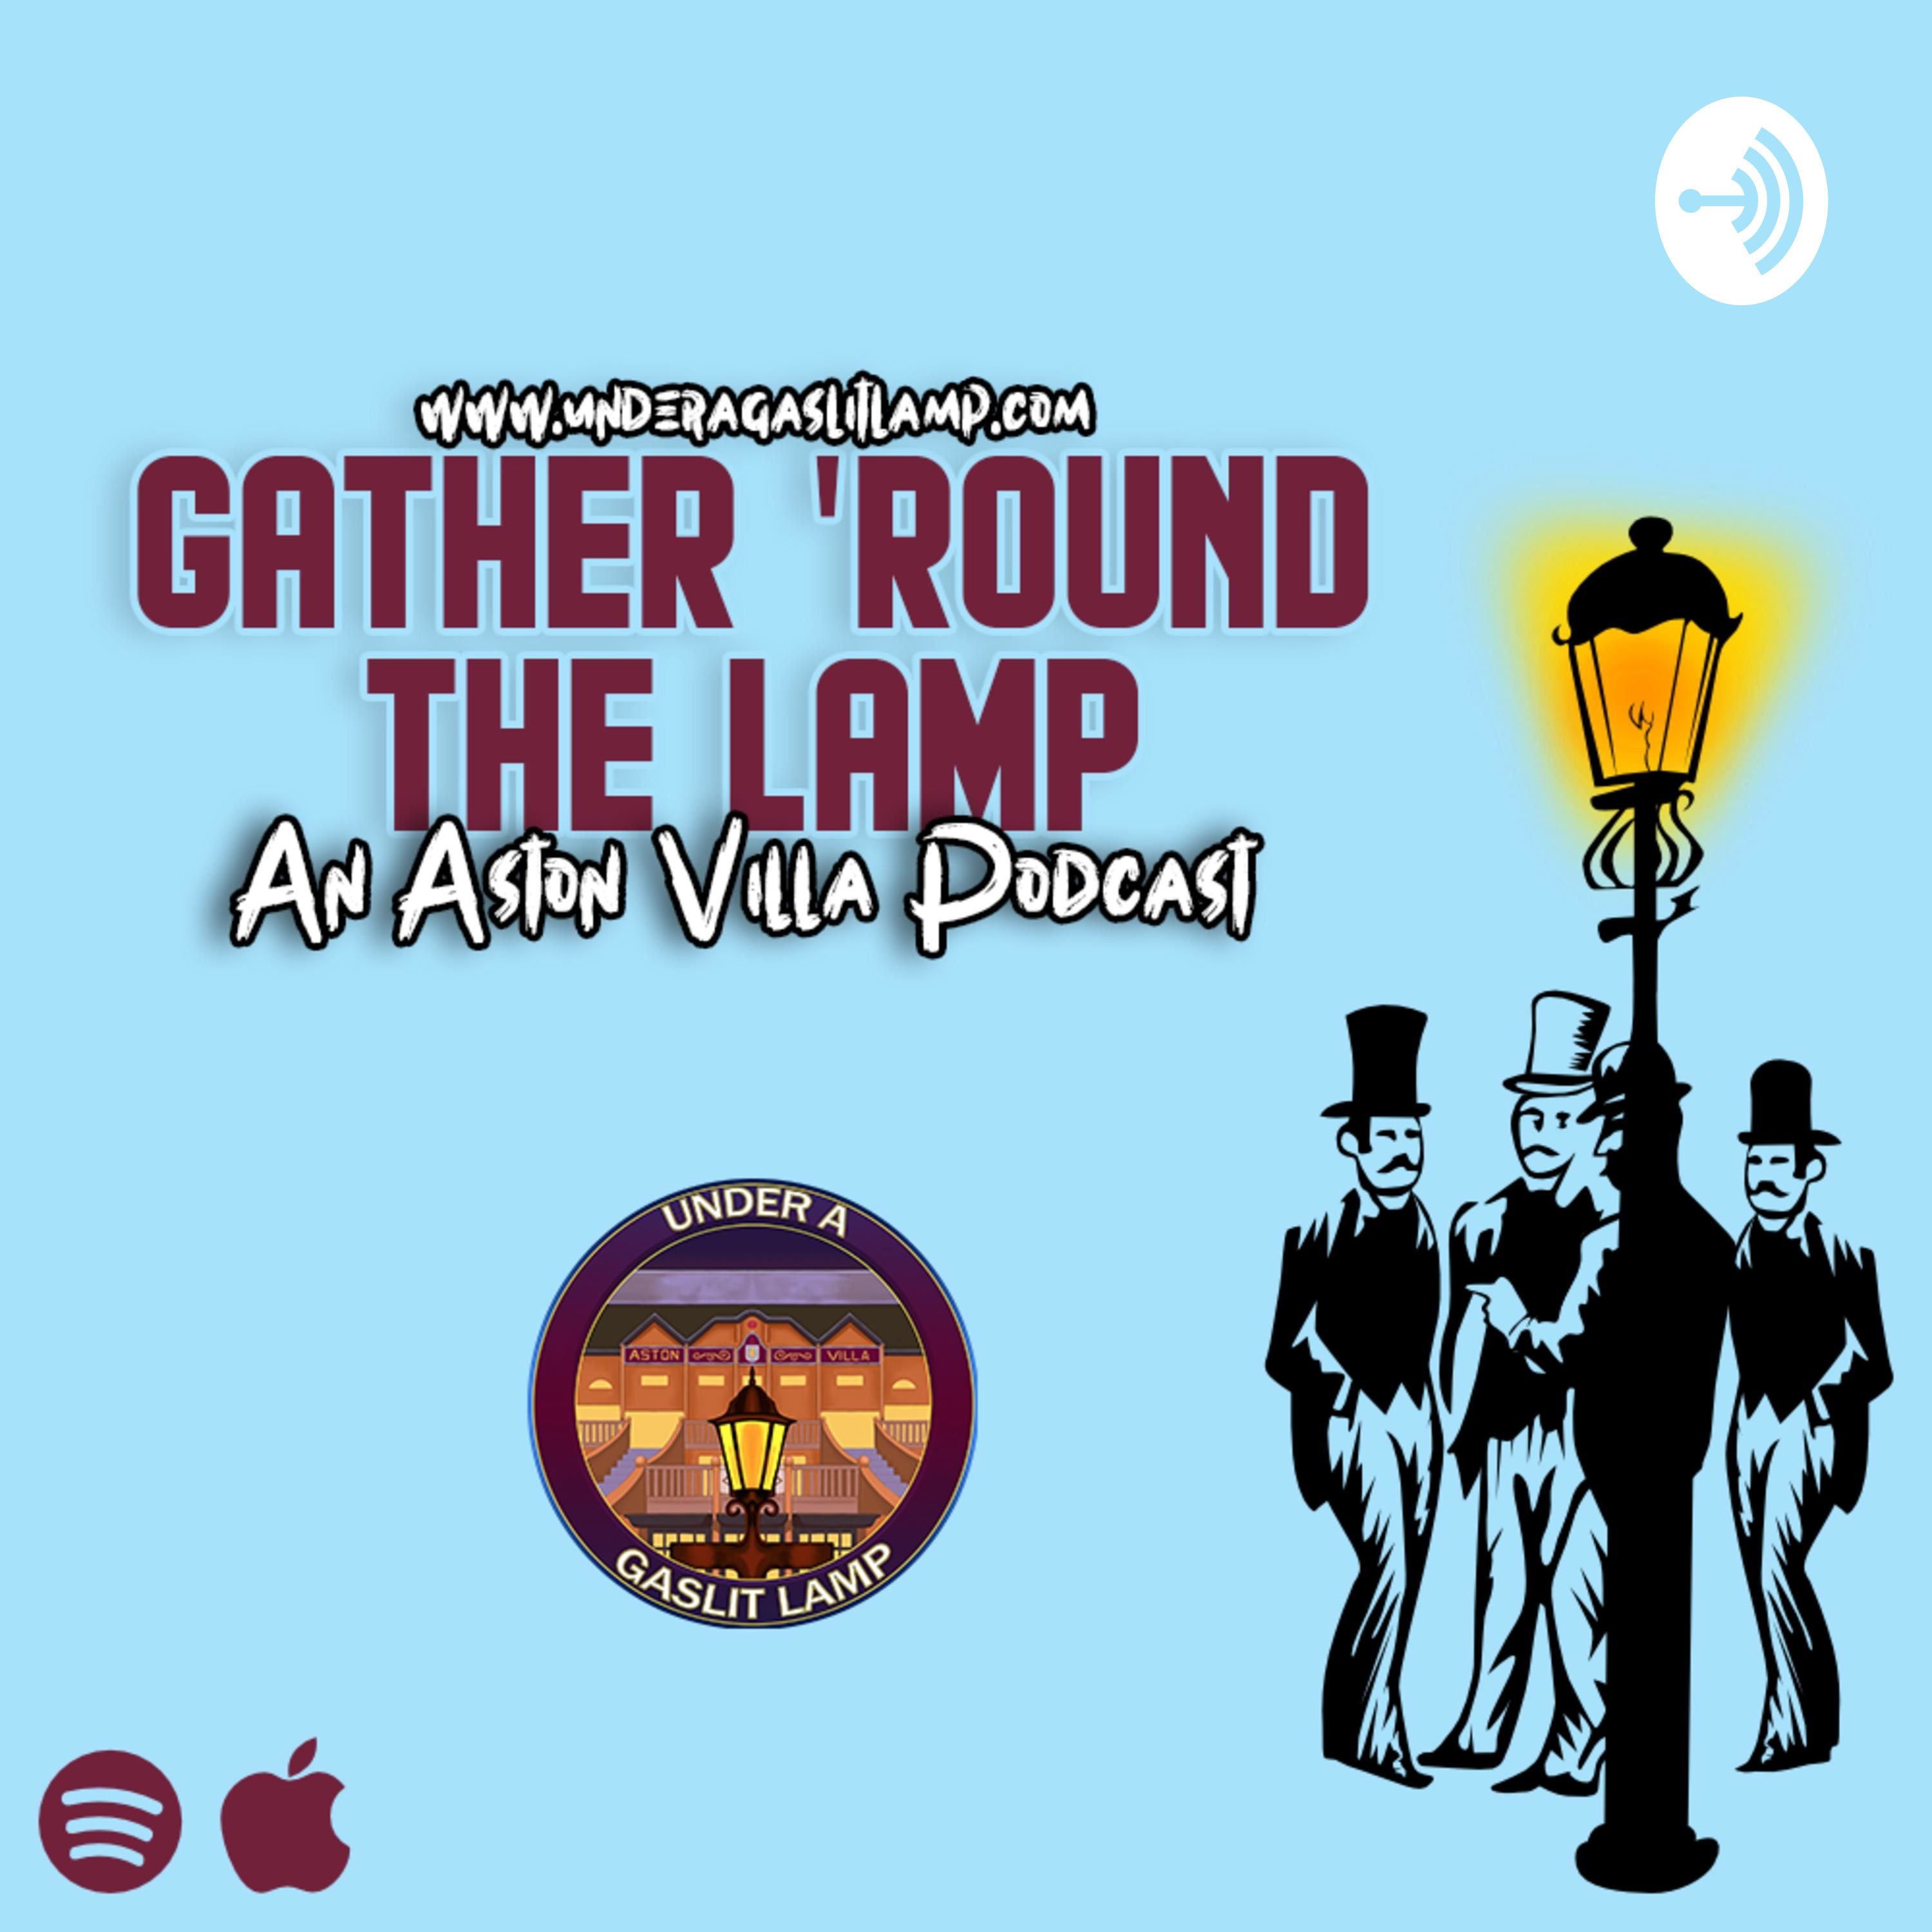 Gather ’Round The Lamp S4 E26 - Cheikh Yourself - Kamara Injury, Style of Play and Getting the Rub of the Green